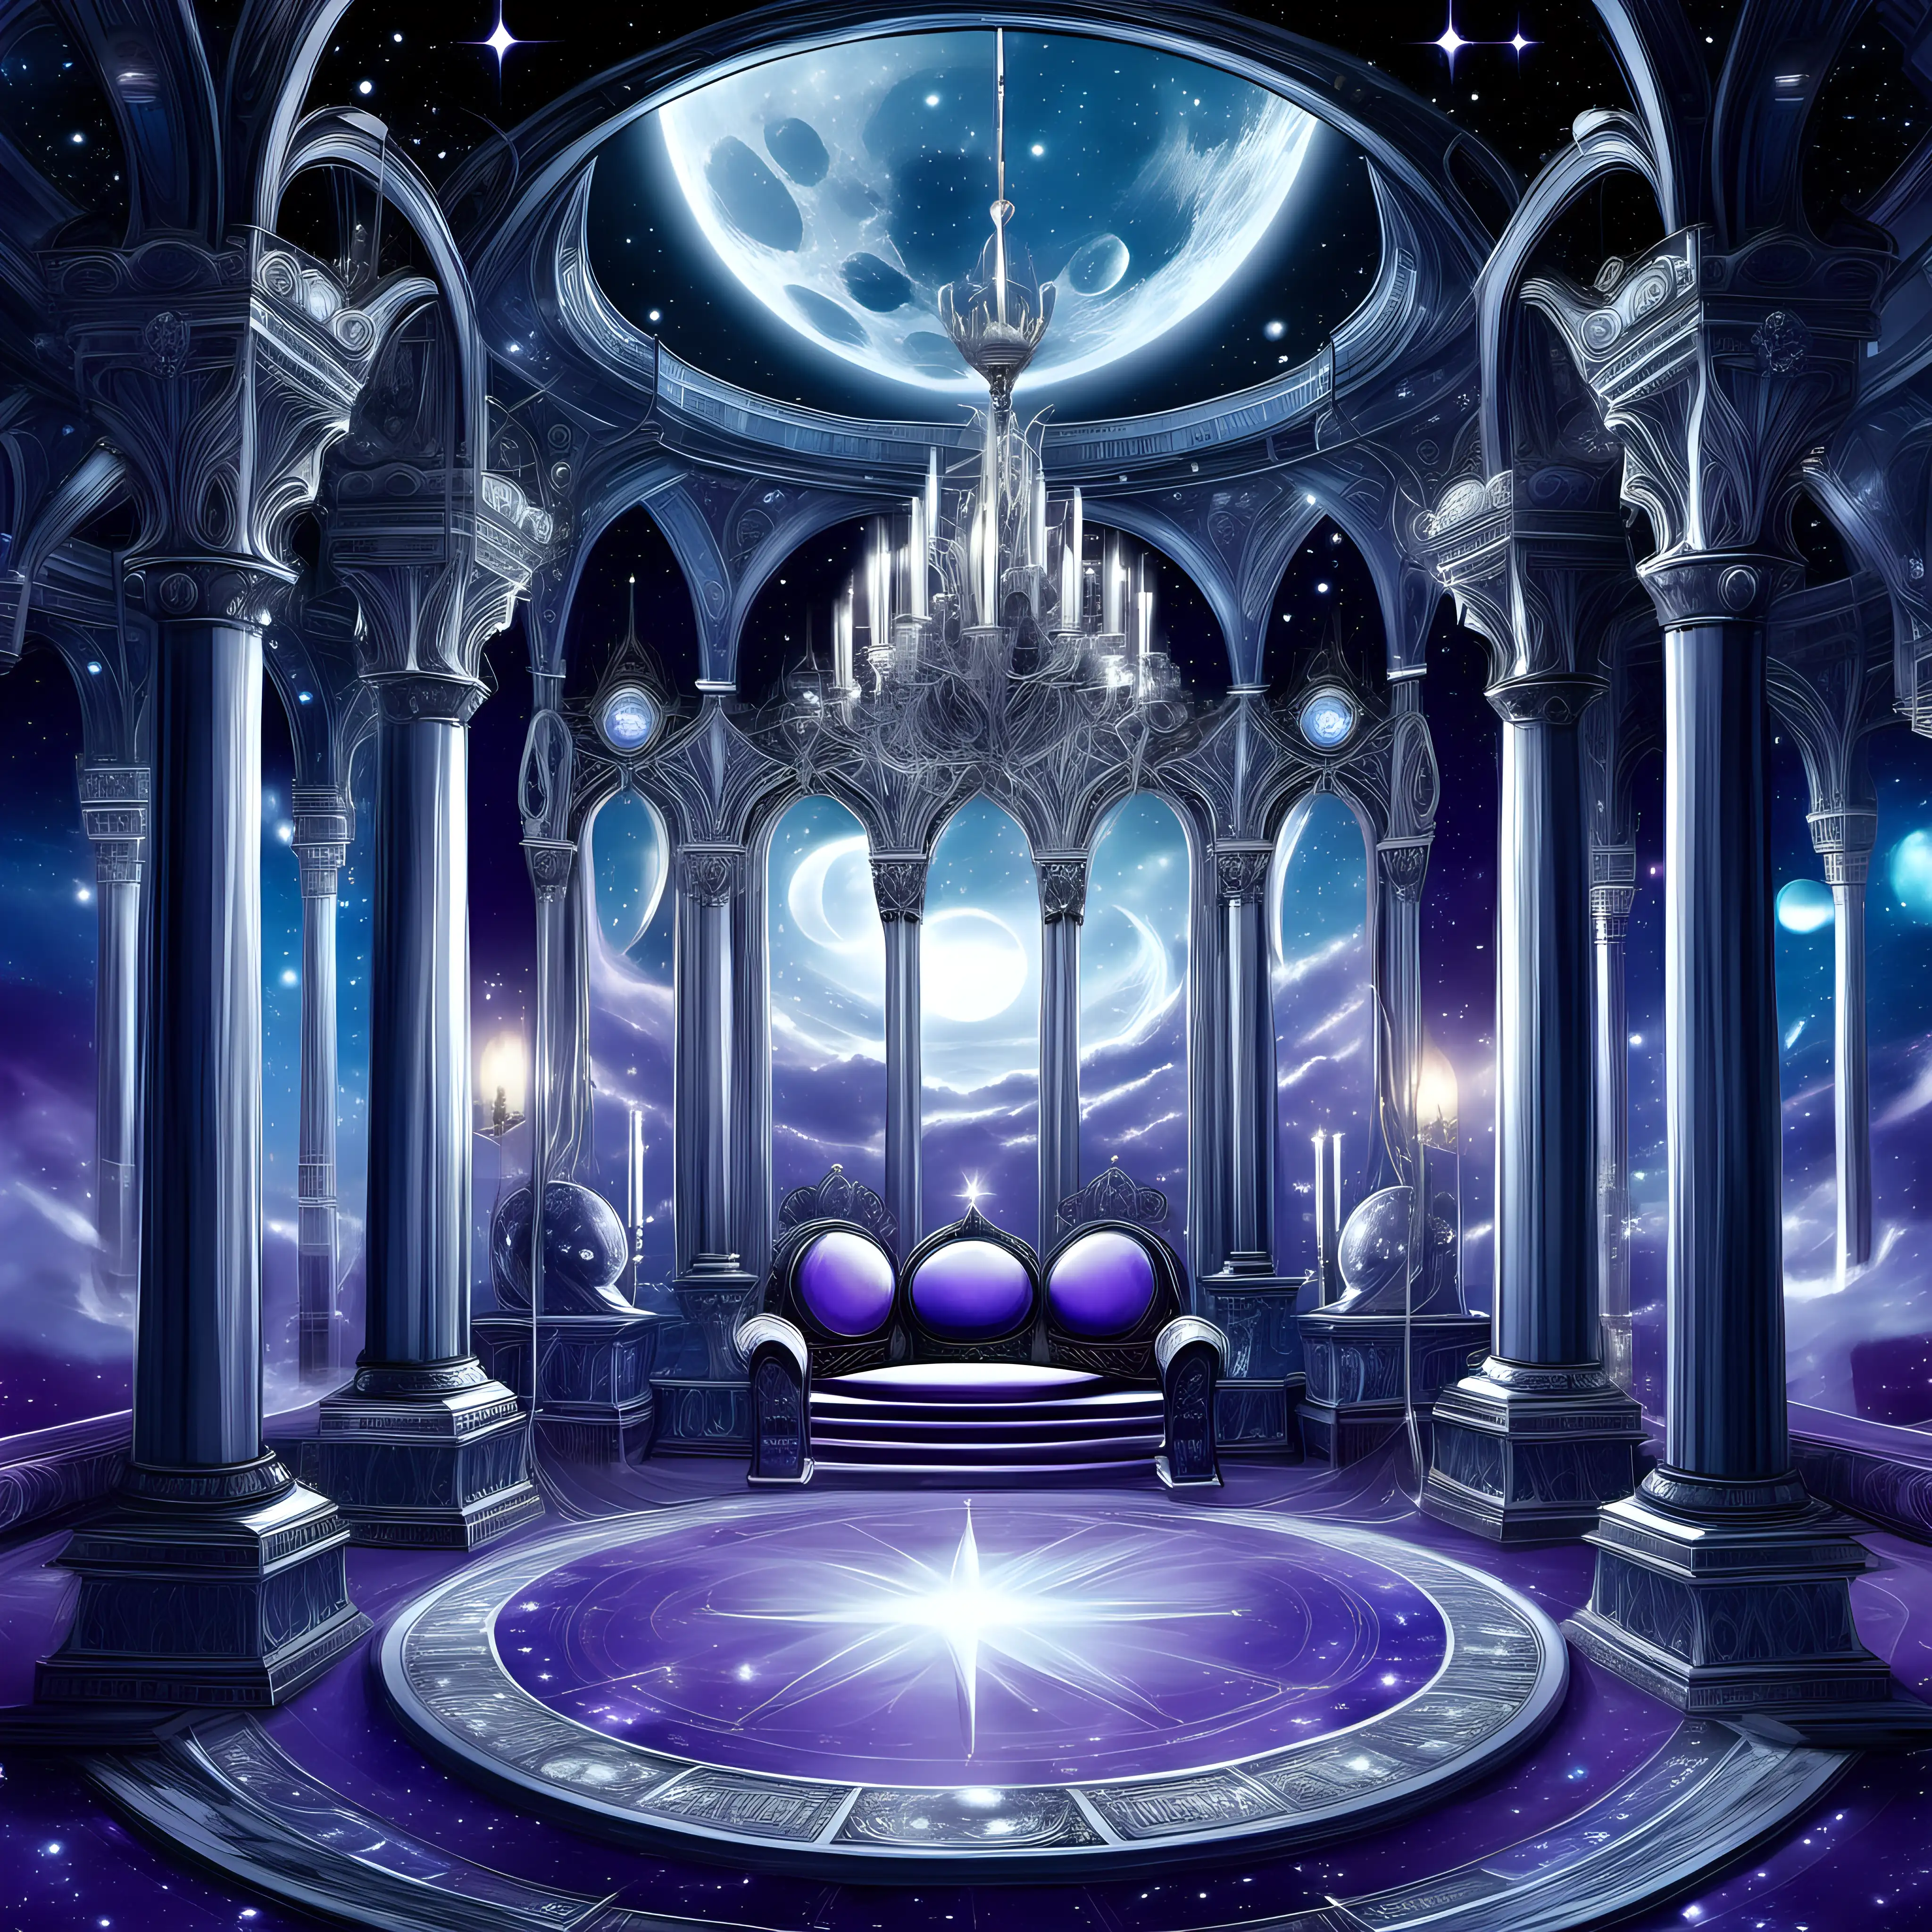 a celestial court based on the moon, dreamy fantasy world, cool colors, blues, purples, white and gray, lunar, silvery, throne, court of silver skinned black haired people, wonder, kingdom court, moonstone pillars, moon phase windows, chandelier